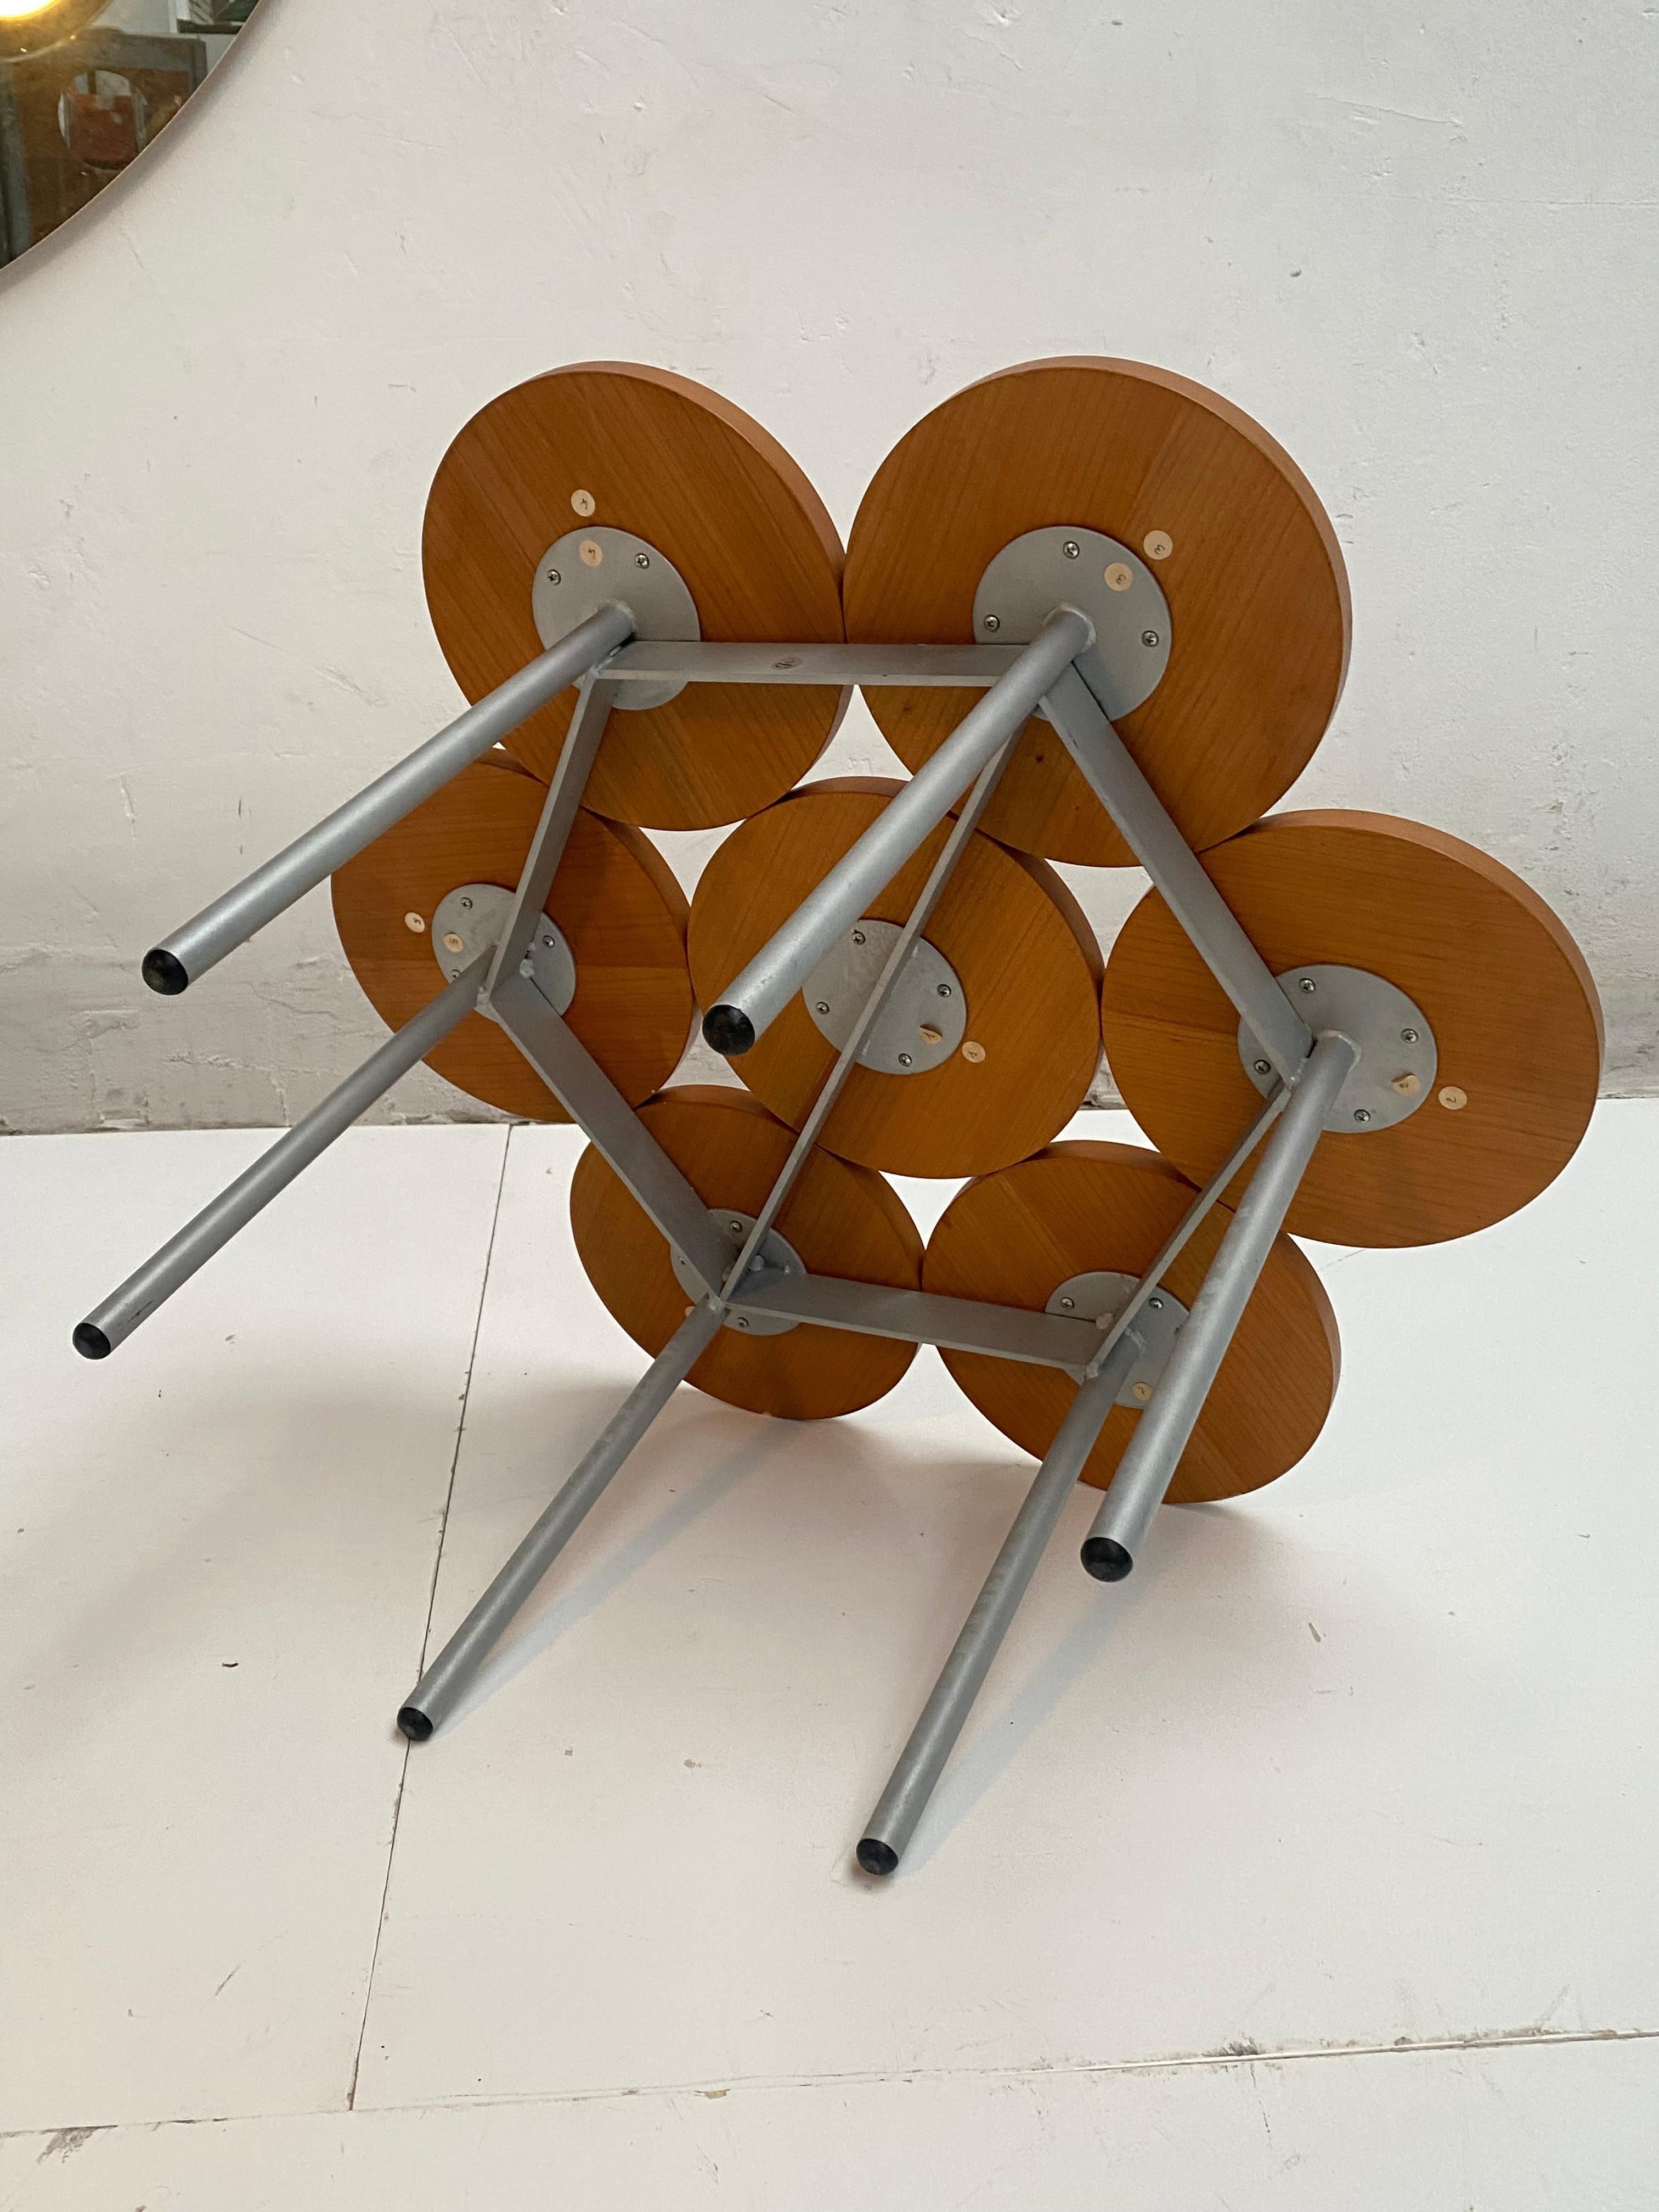 flower shaped side table